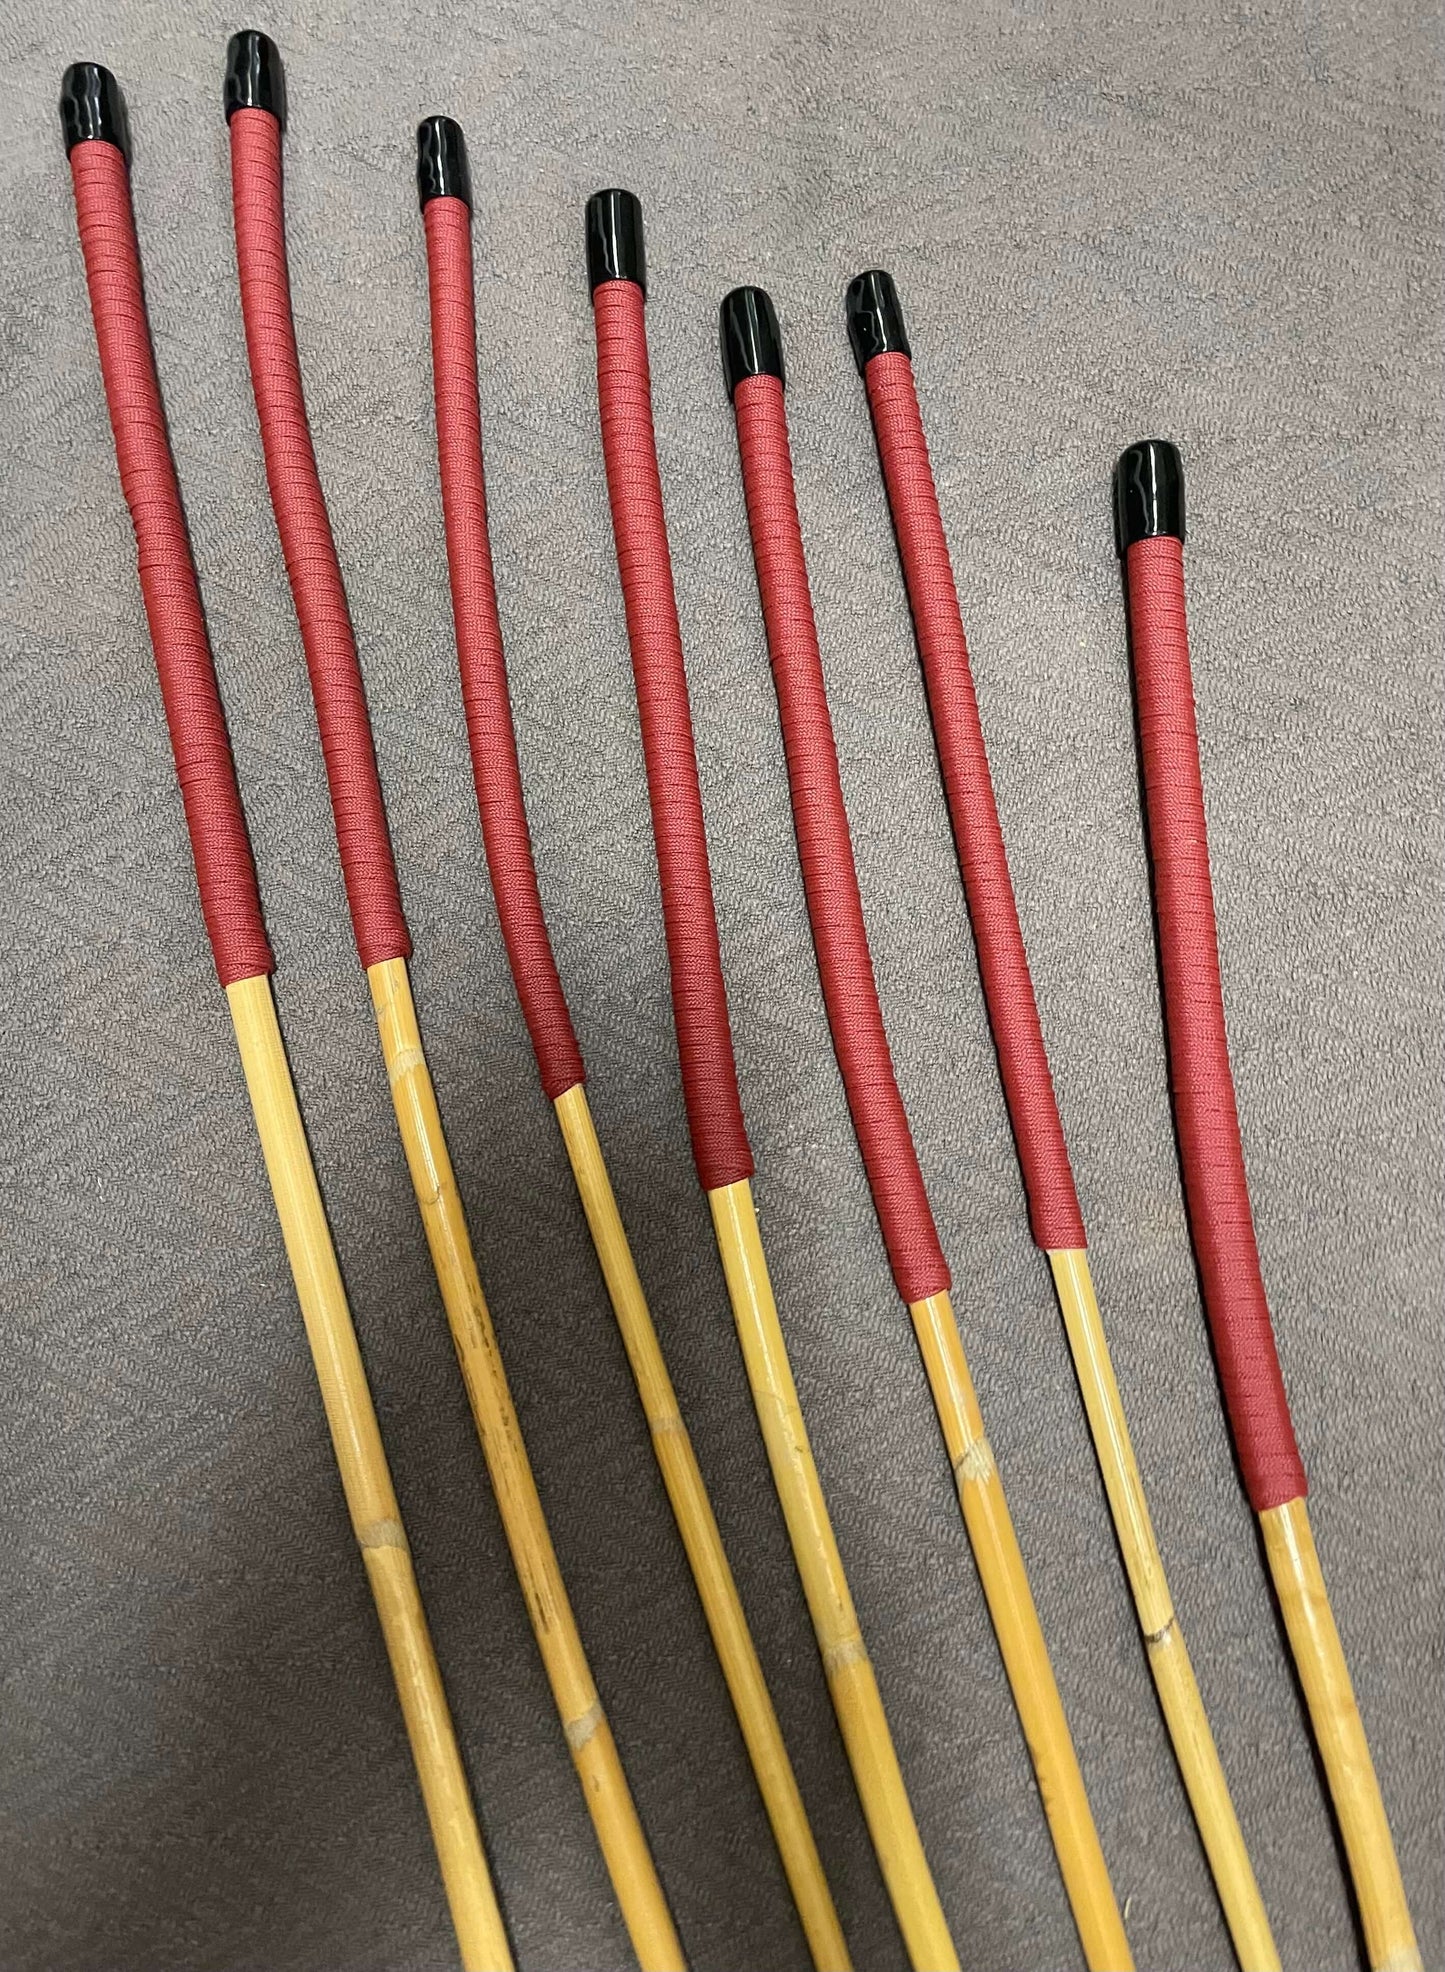 Beginner / Novice Set of 7 Classic Kooboo Rattan Punishment canes with BRICK RED Paracord Handles  - Englishvice Canes